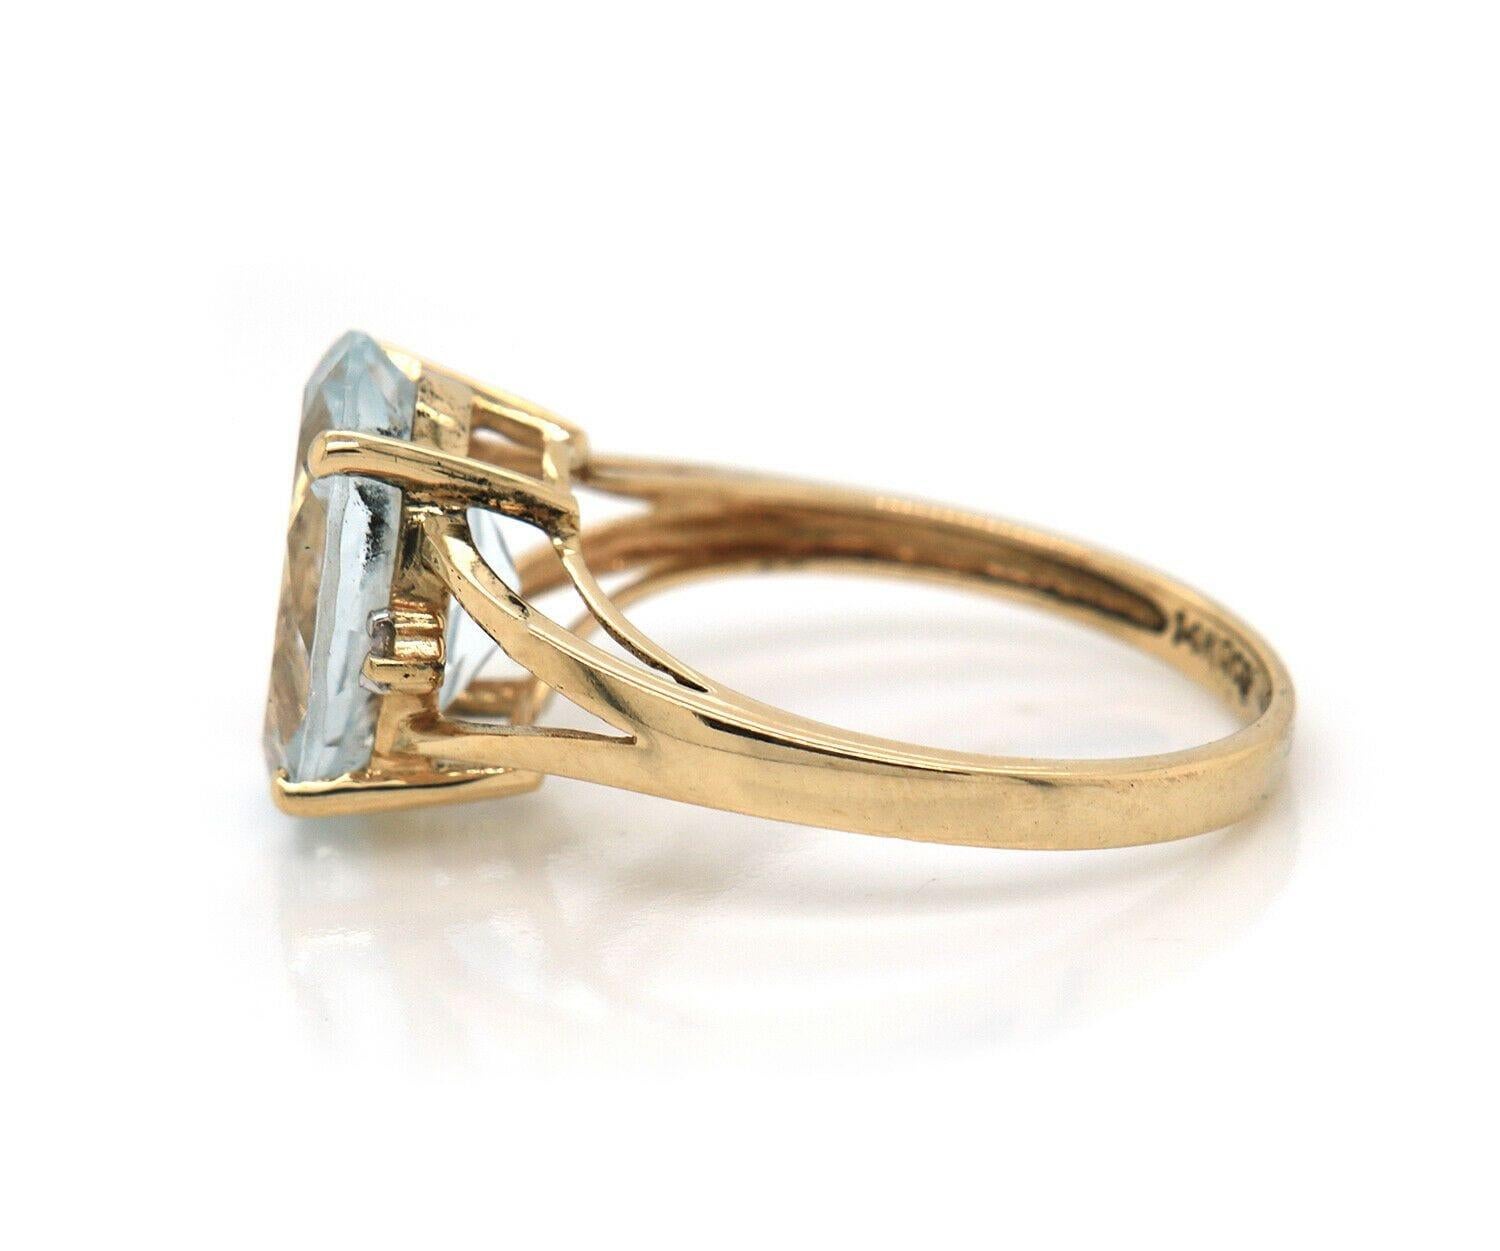 Oval Aquamarine and 0.04ctw Diamond Split Shank Ring in 14K

Oval Aquamarine and Diamond Split Shank Ring
14K Yellow Gold
Oval Aquamarine Dimensions: Approx. 12.0 X 10.0 MM
Diamonds Carat Weight: Approx. 0.04ctw
Band Width: Approx. 2.0 MM
Ring Size: